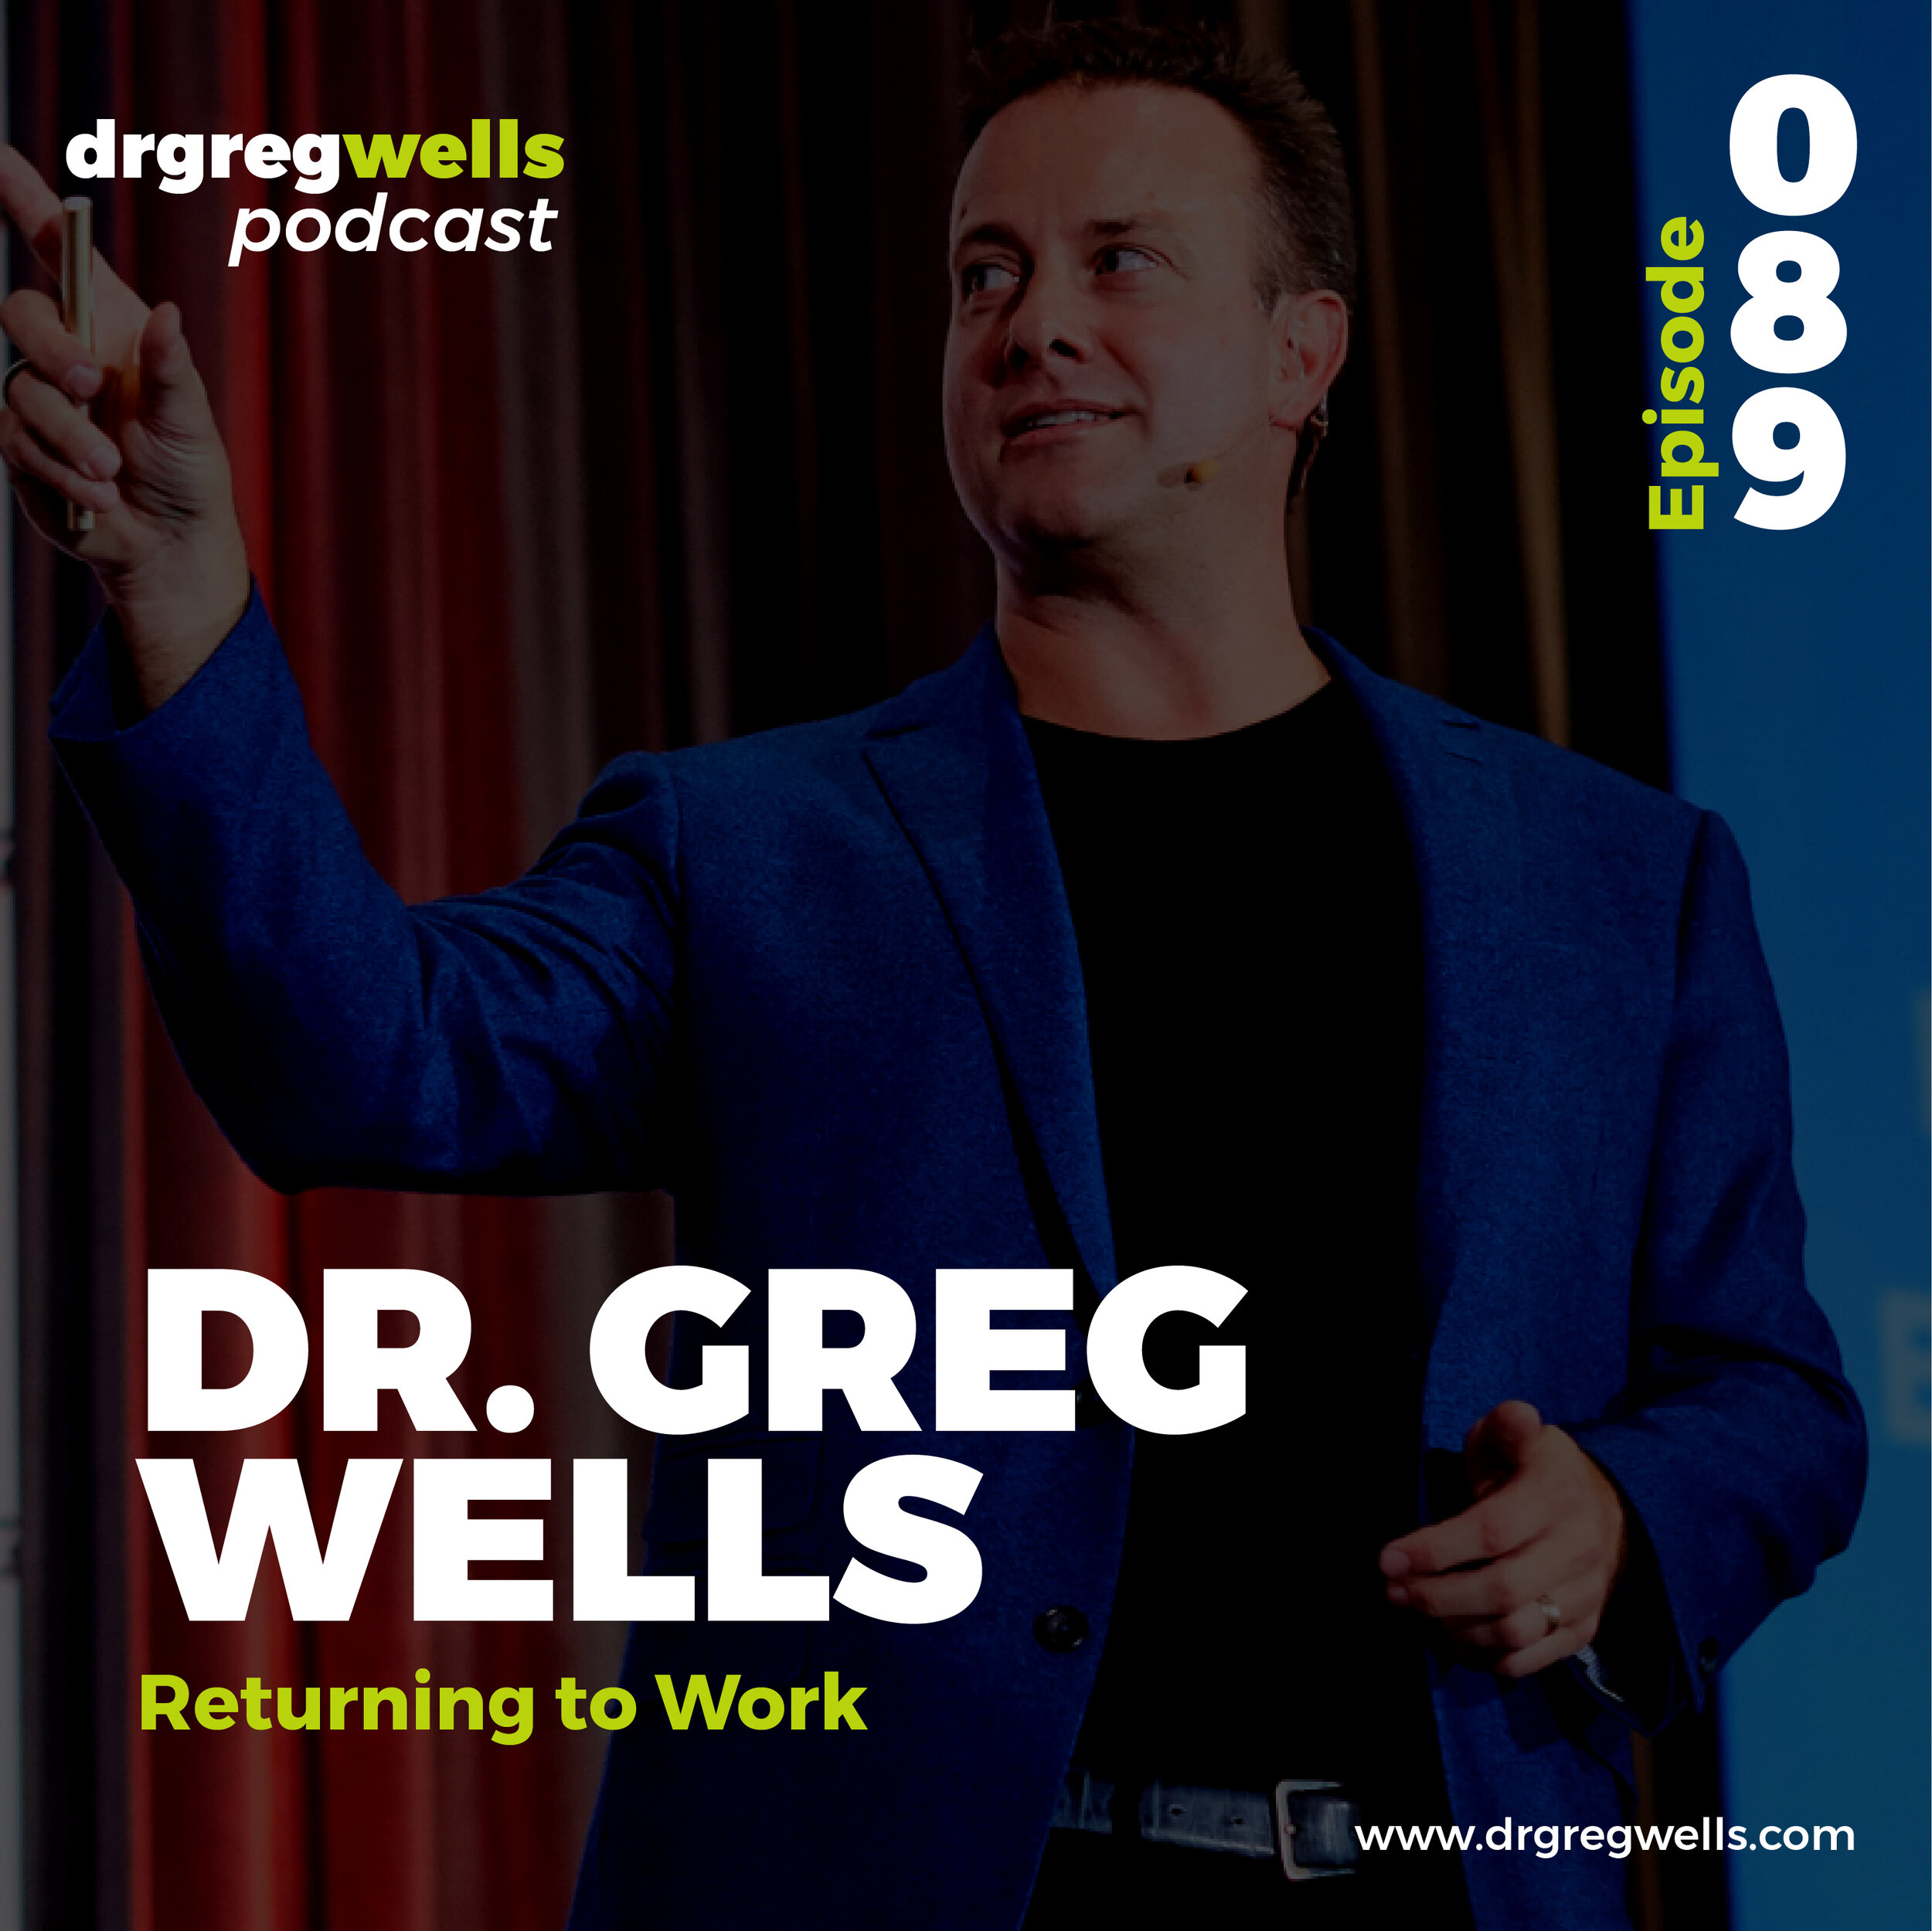 Dr Greg Wells Podcast Guest EP 89-01.jpg